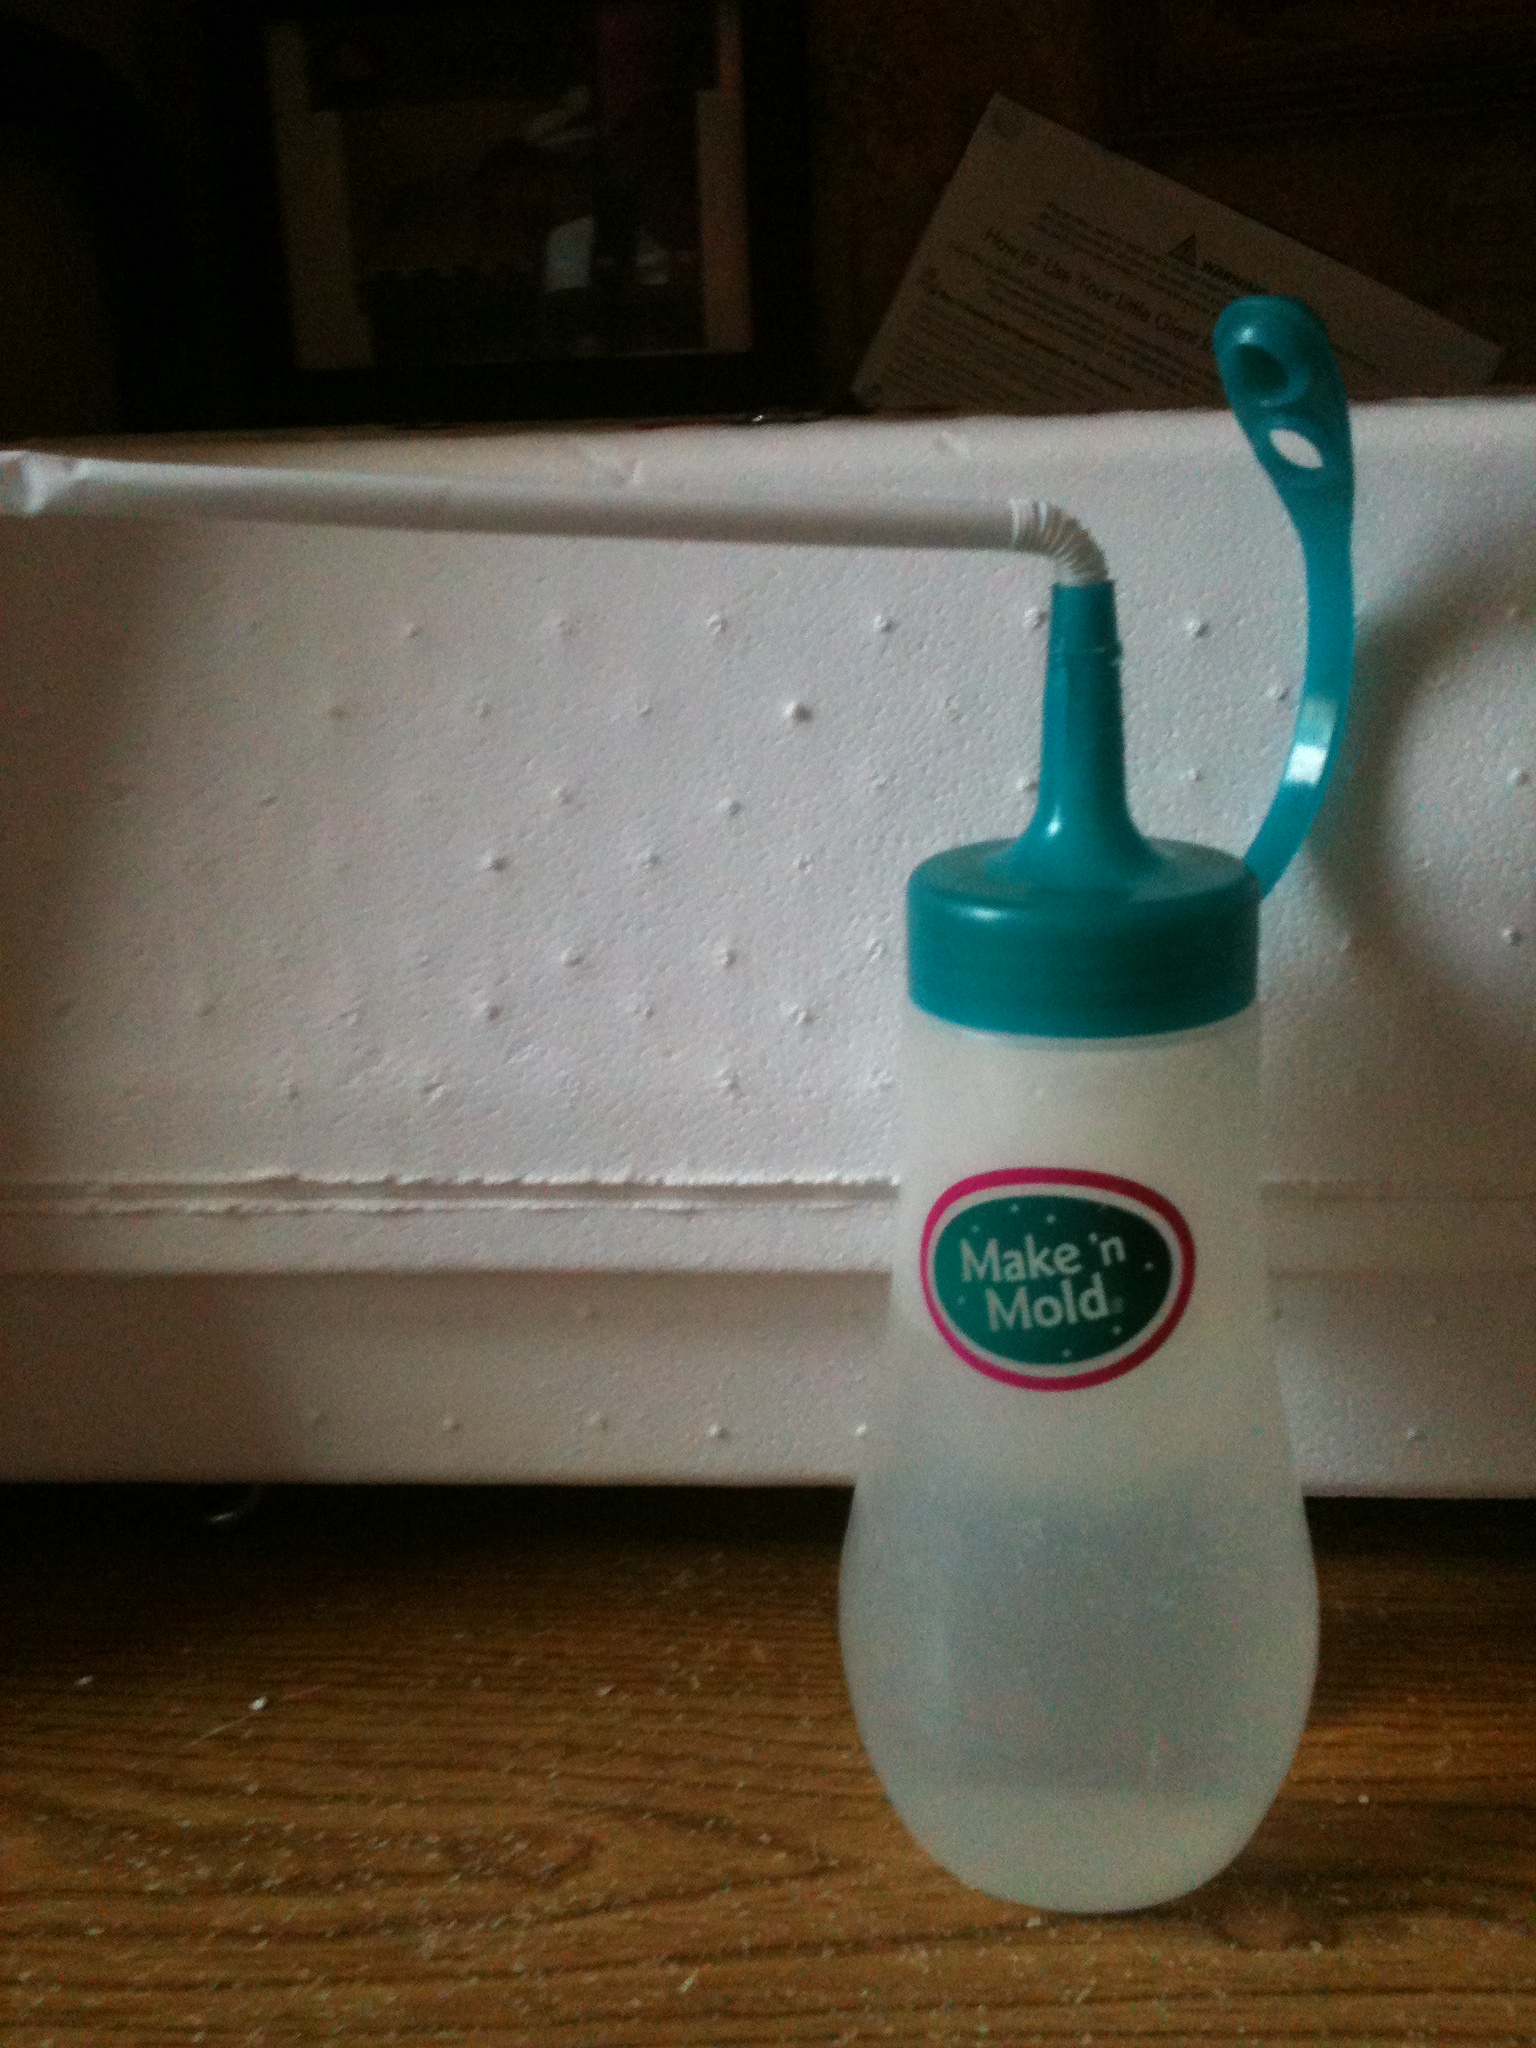 make shift squeeze bottle for adding water for humidity without opening incubator